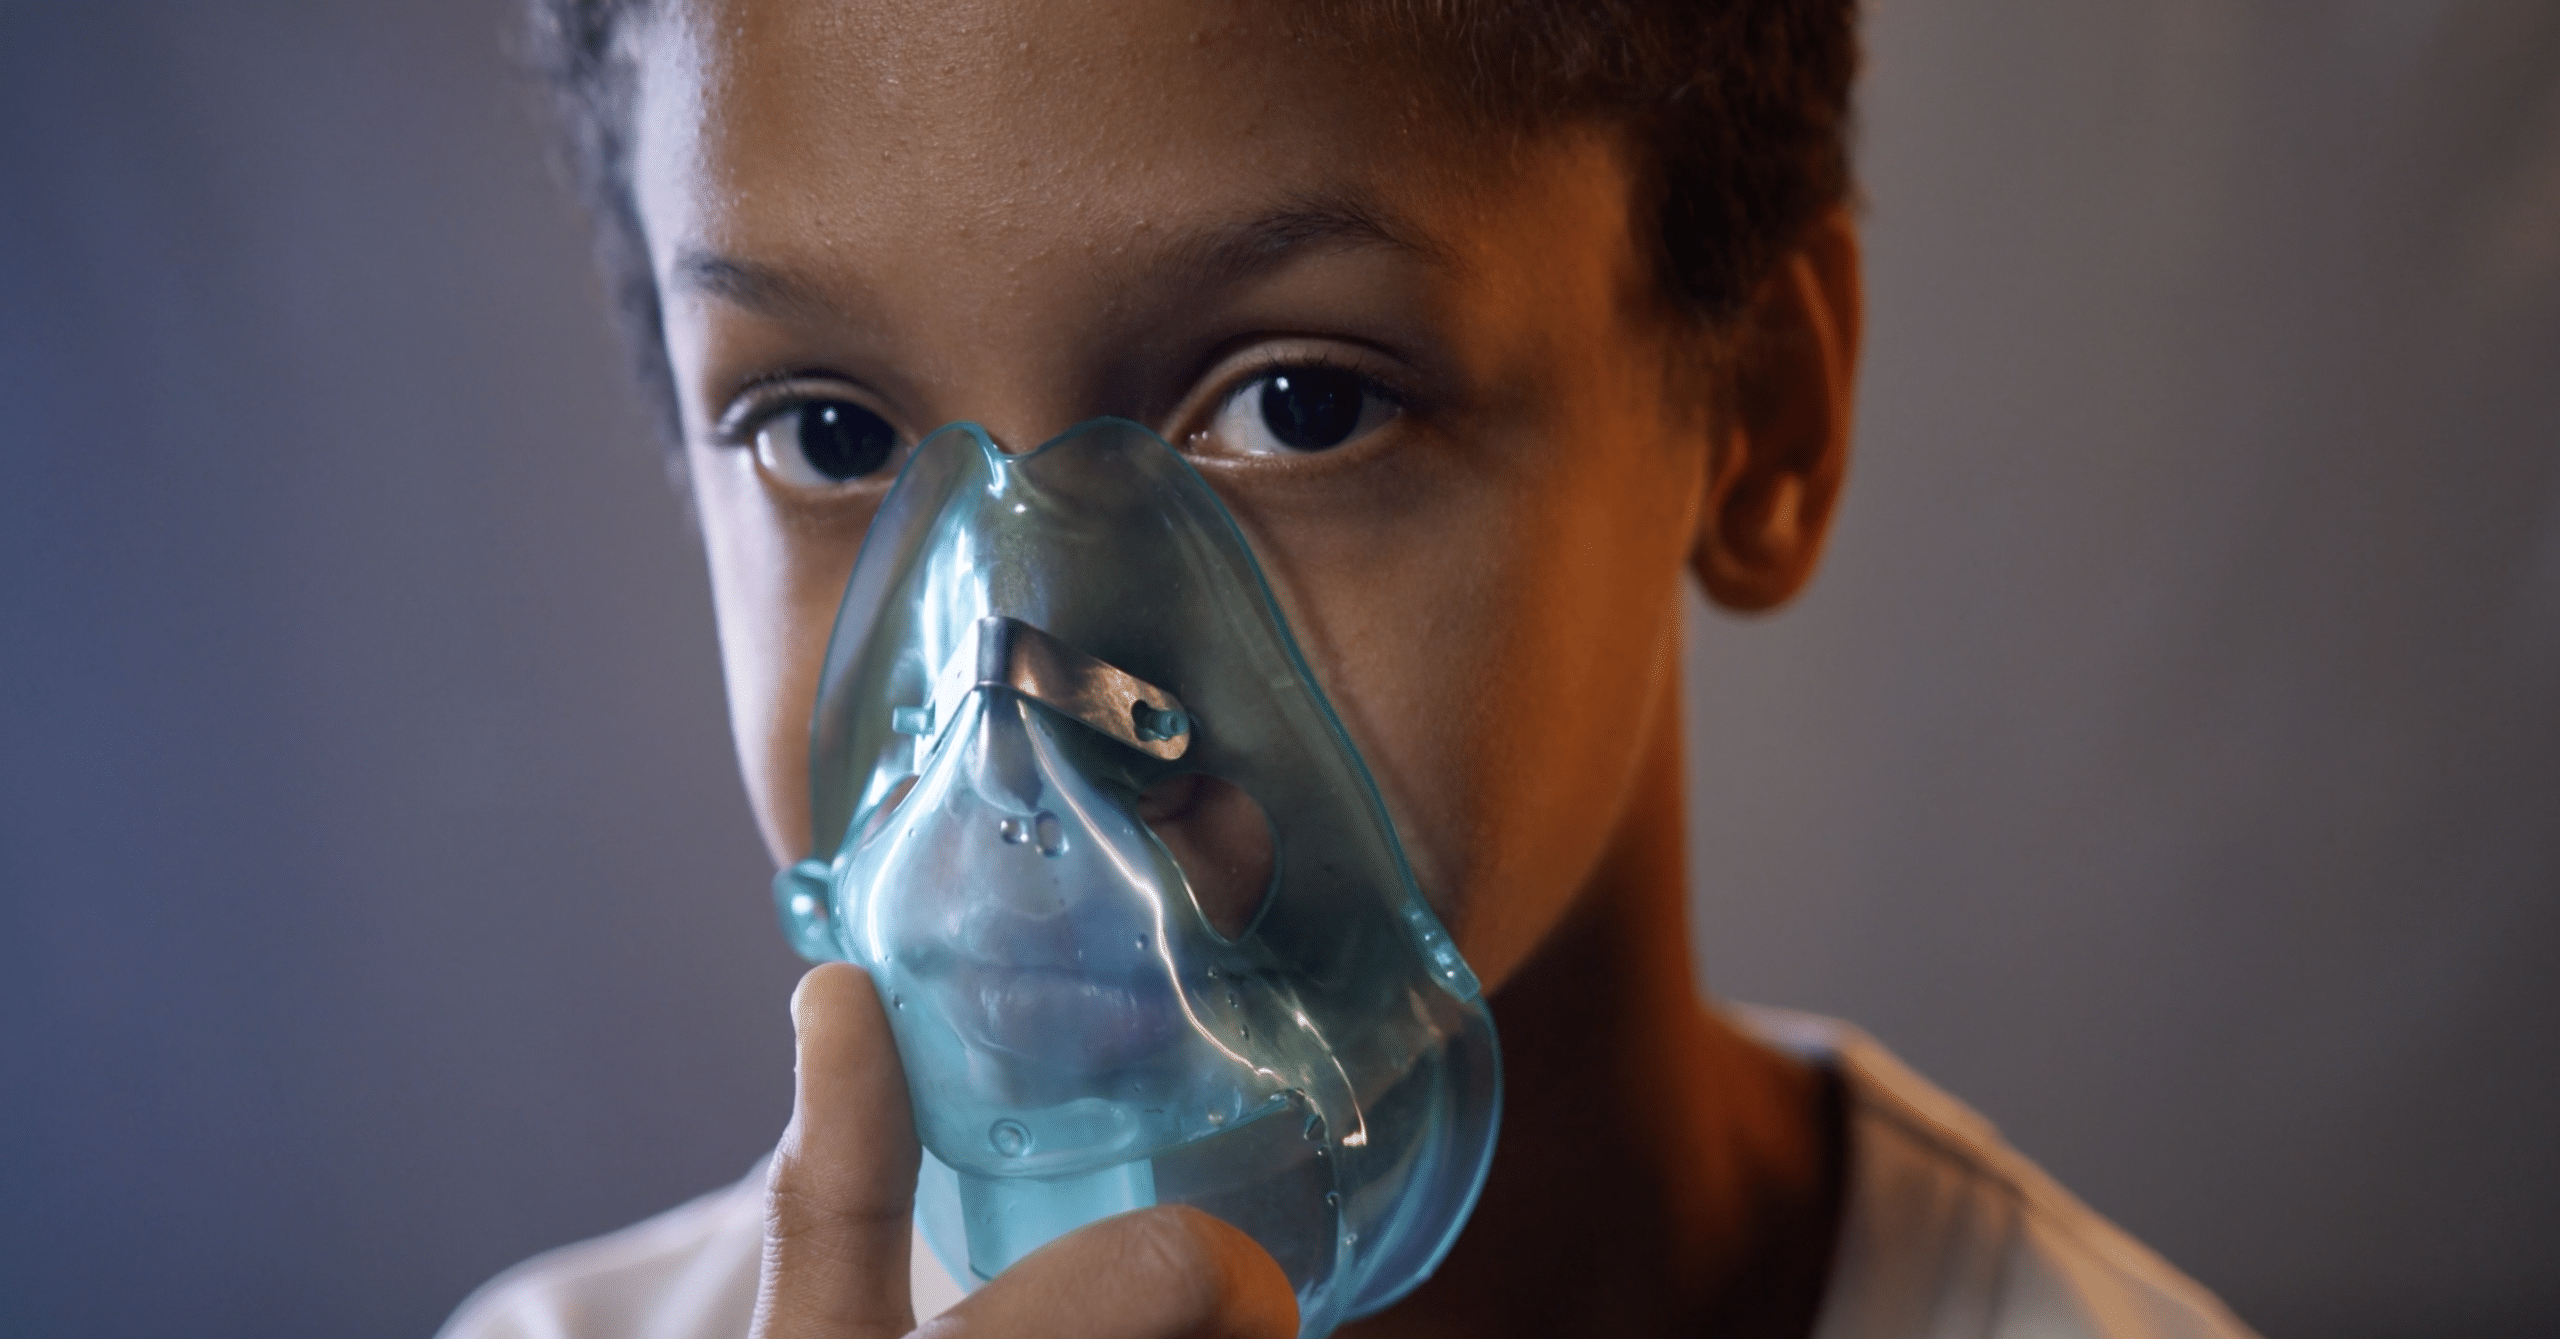 Screenshot 2021 10 27 at 5.16.48 PM - 9 Best Nebulizer for Kids: Reviews and Buying Guide 2022